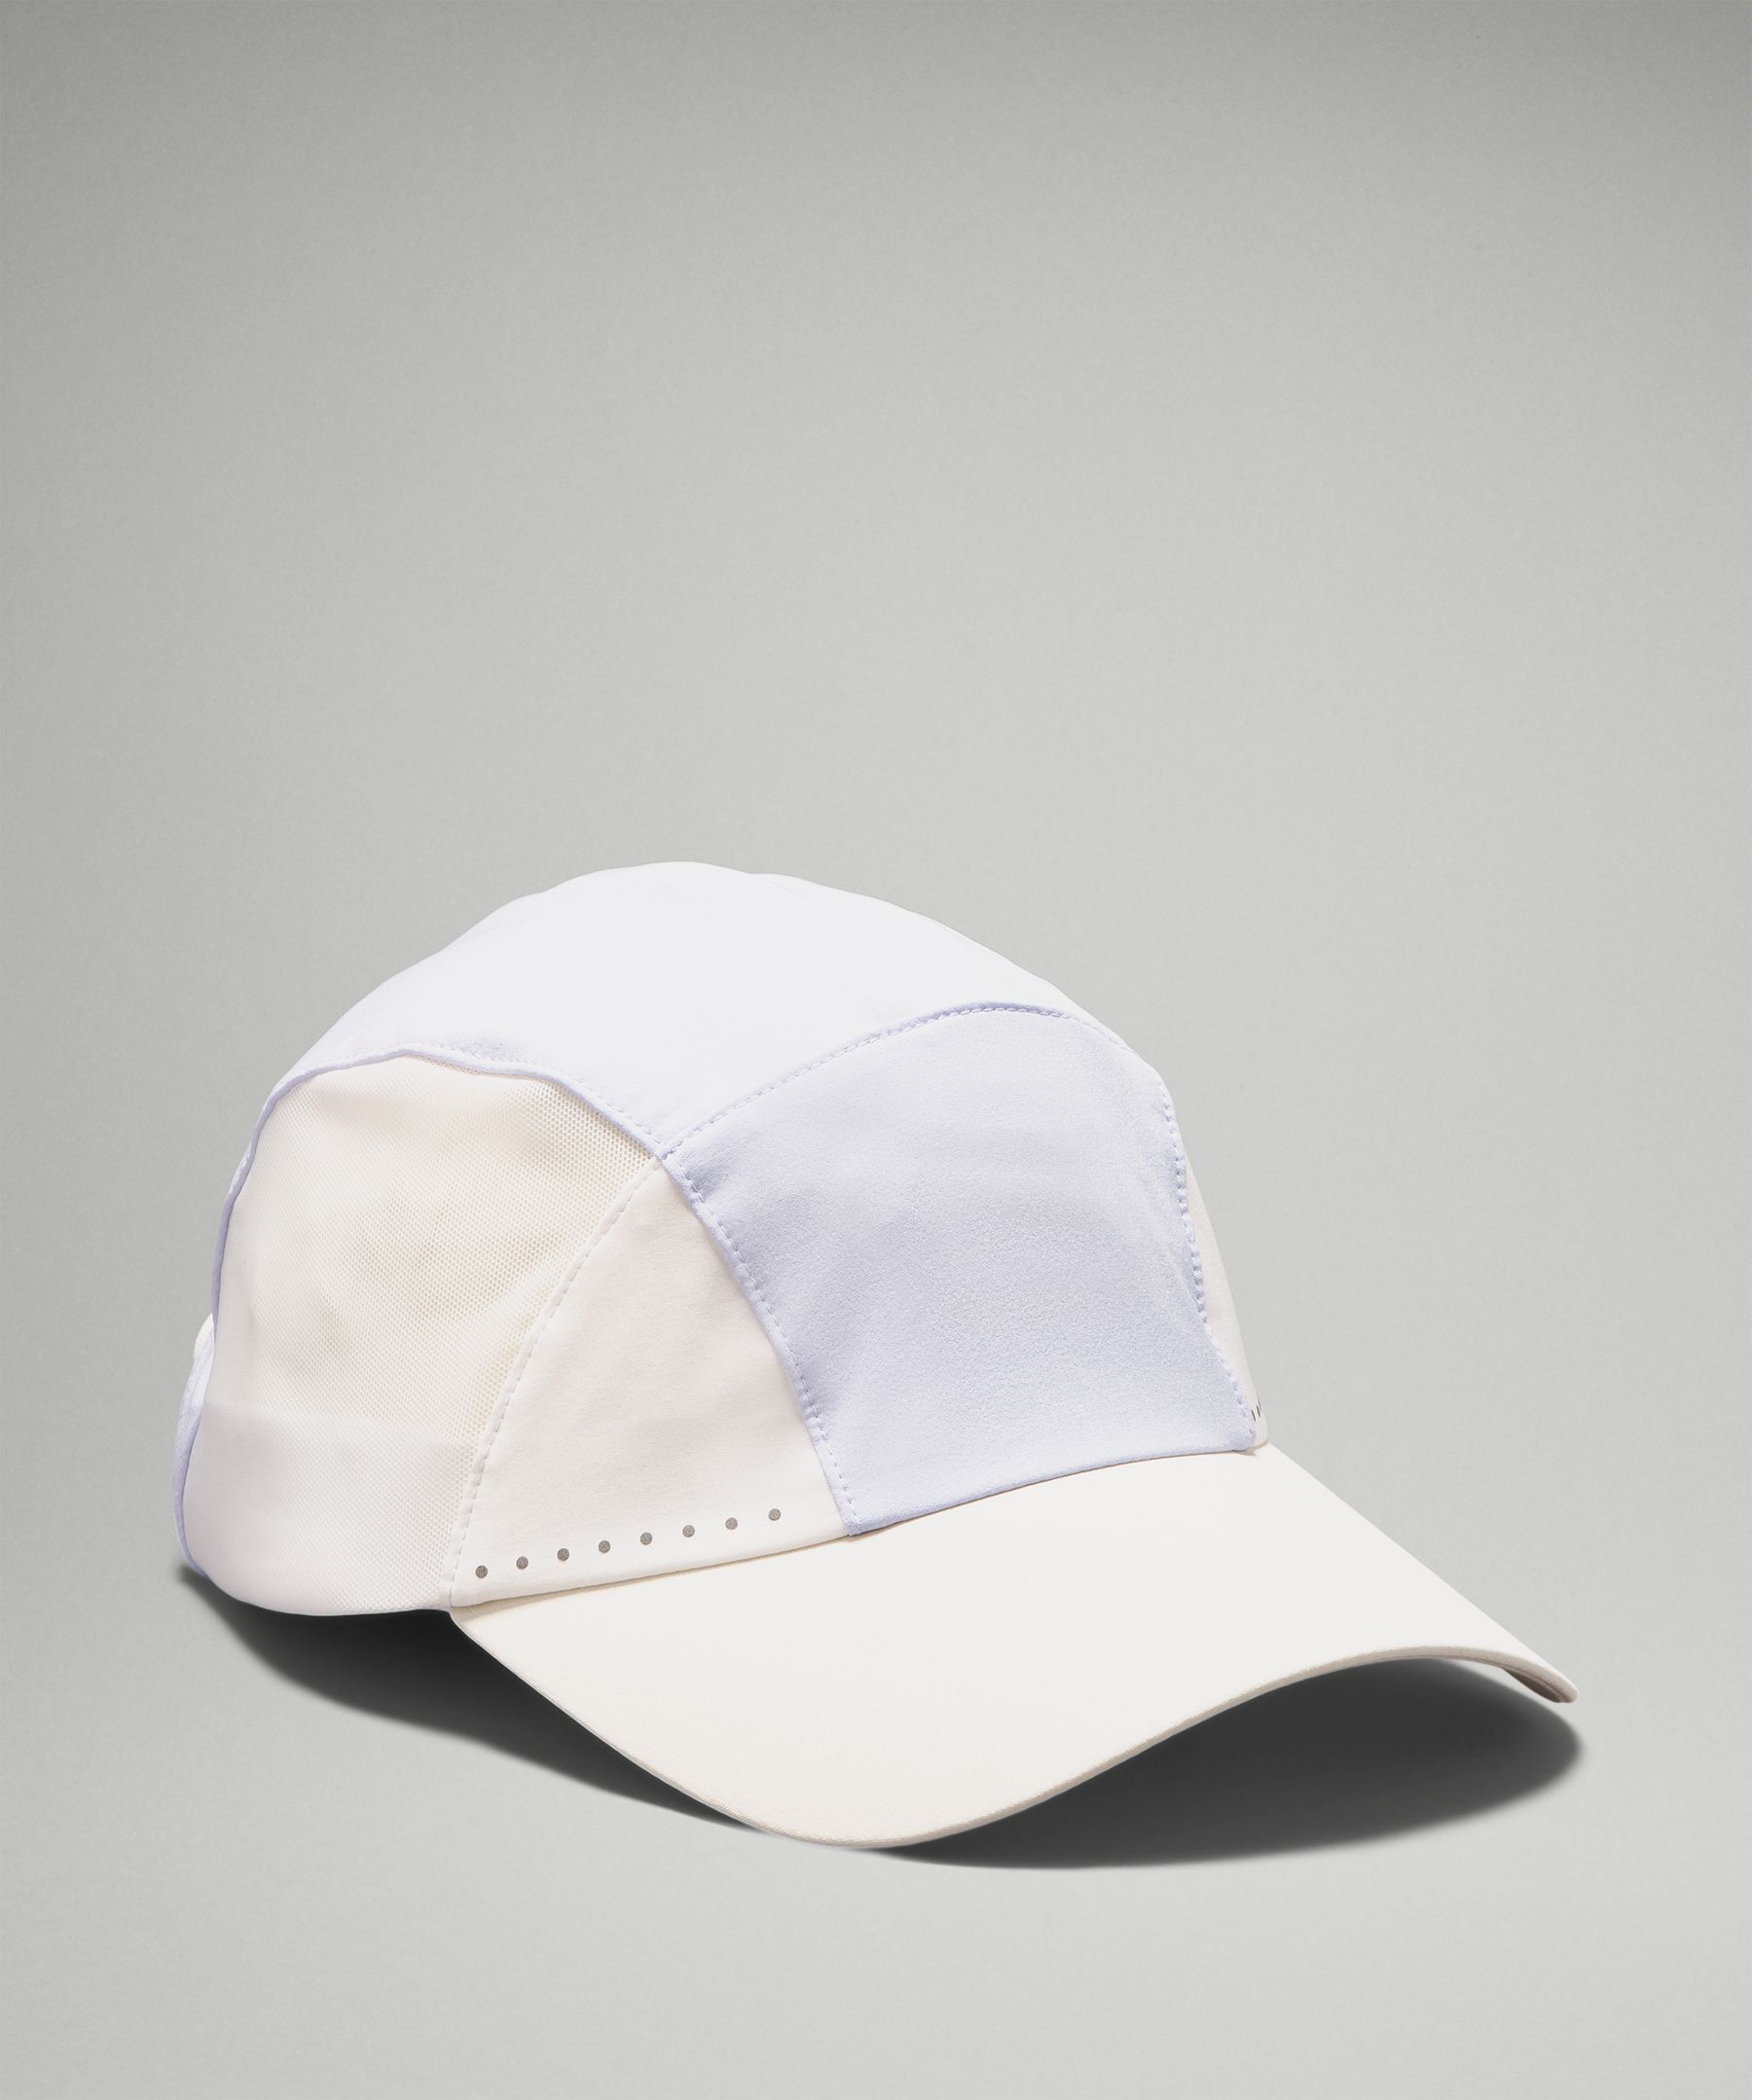 Lululemon Women's Fast and Free Running Hat Elite *Online Only. 1